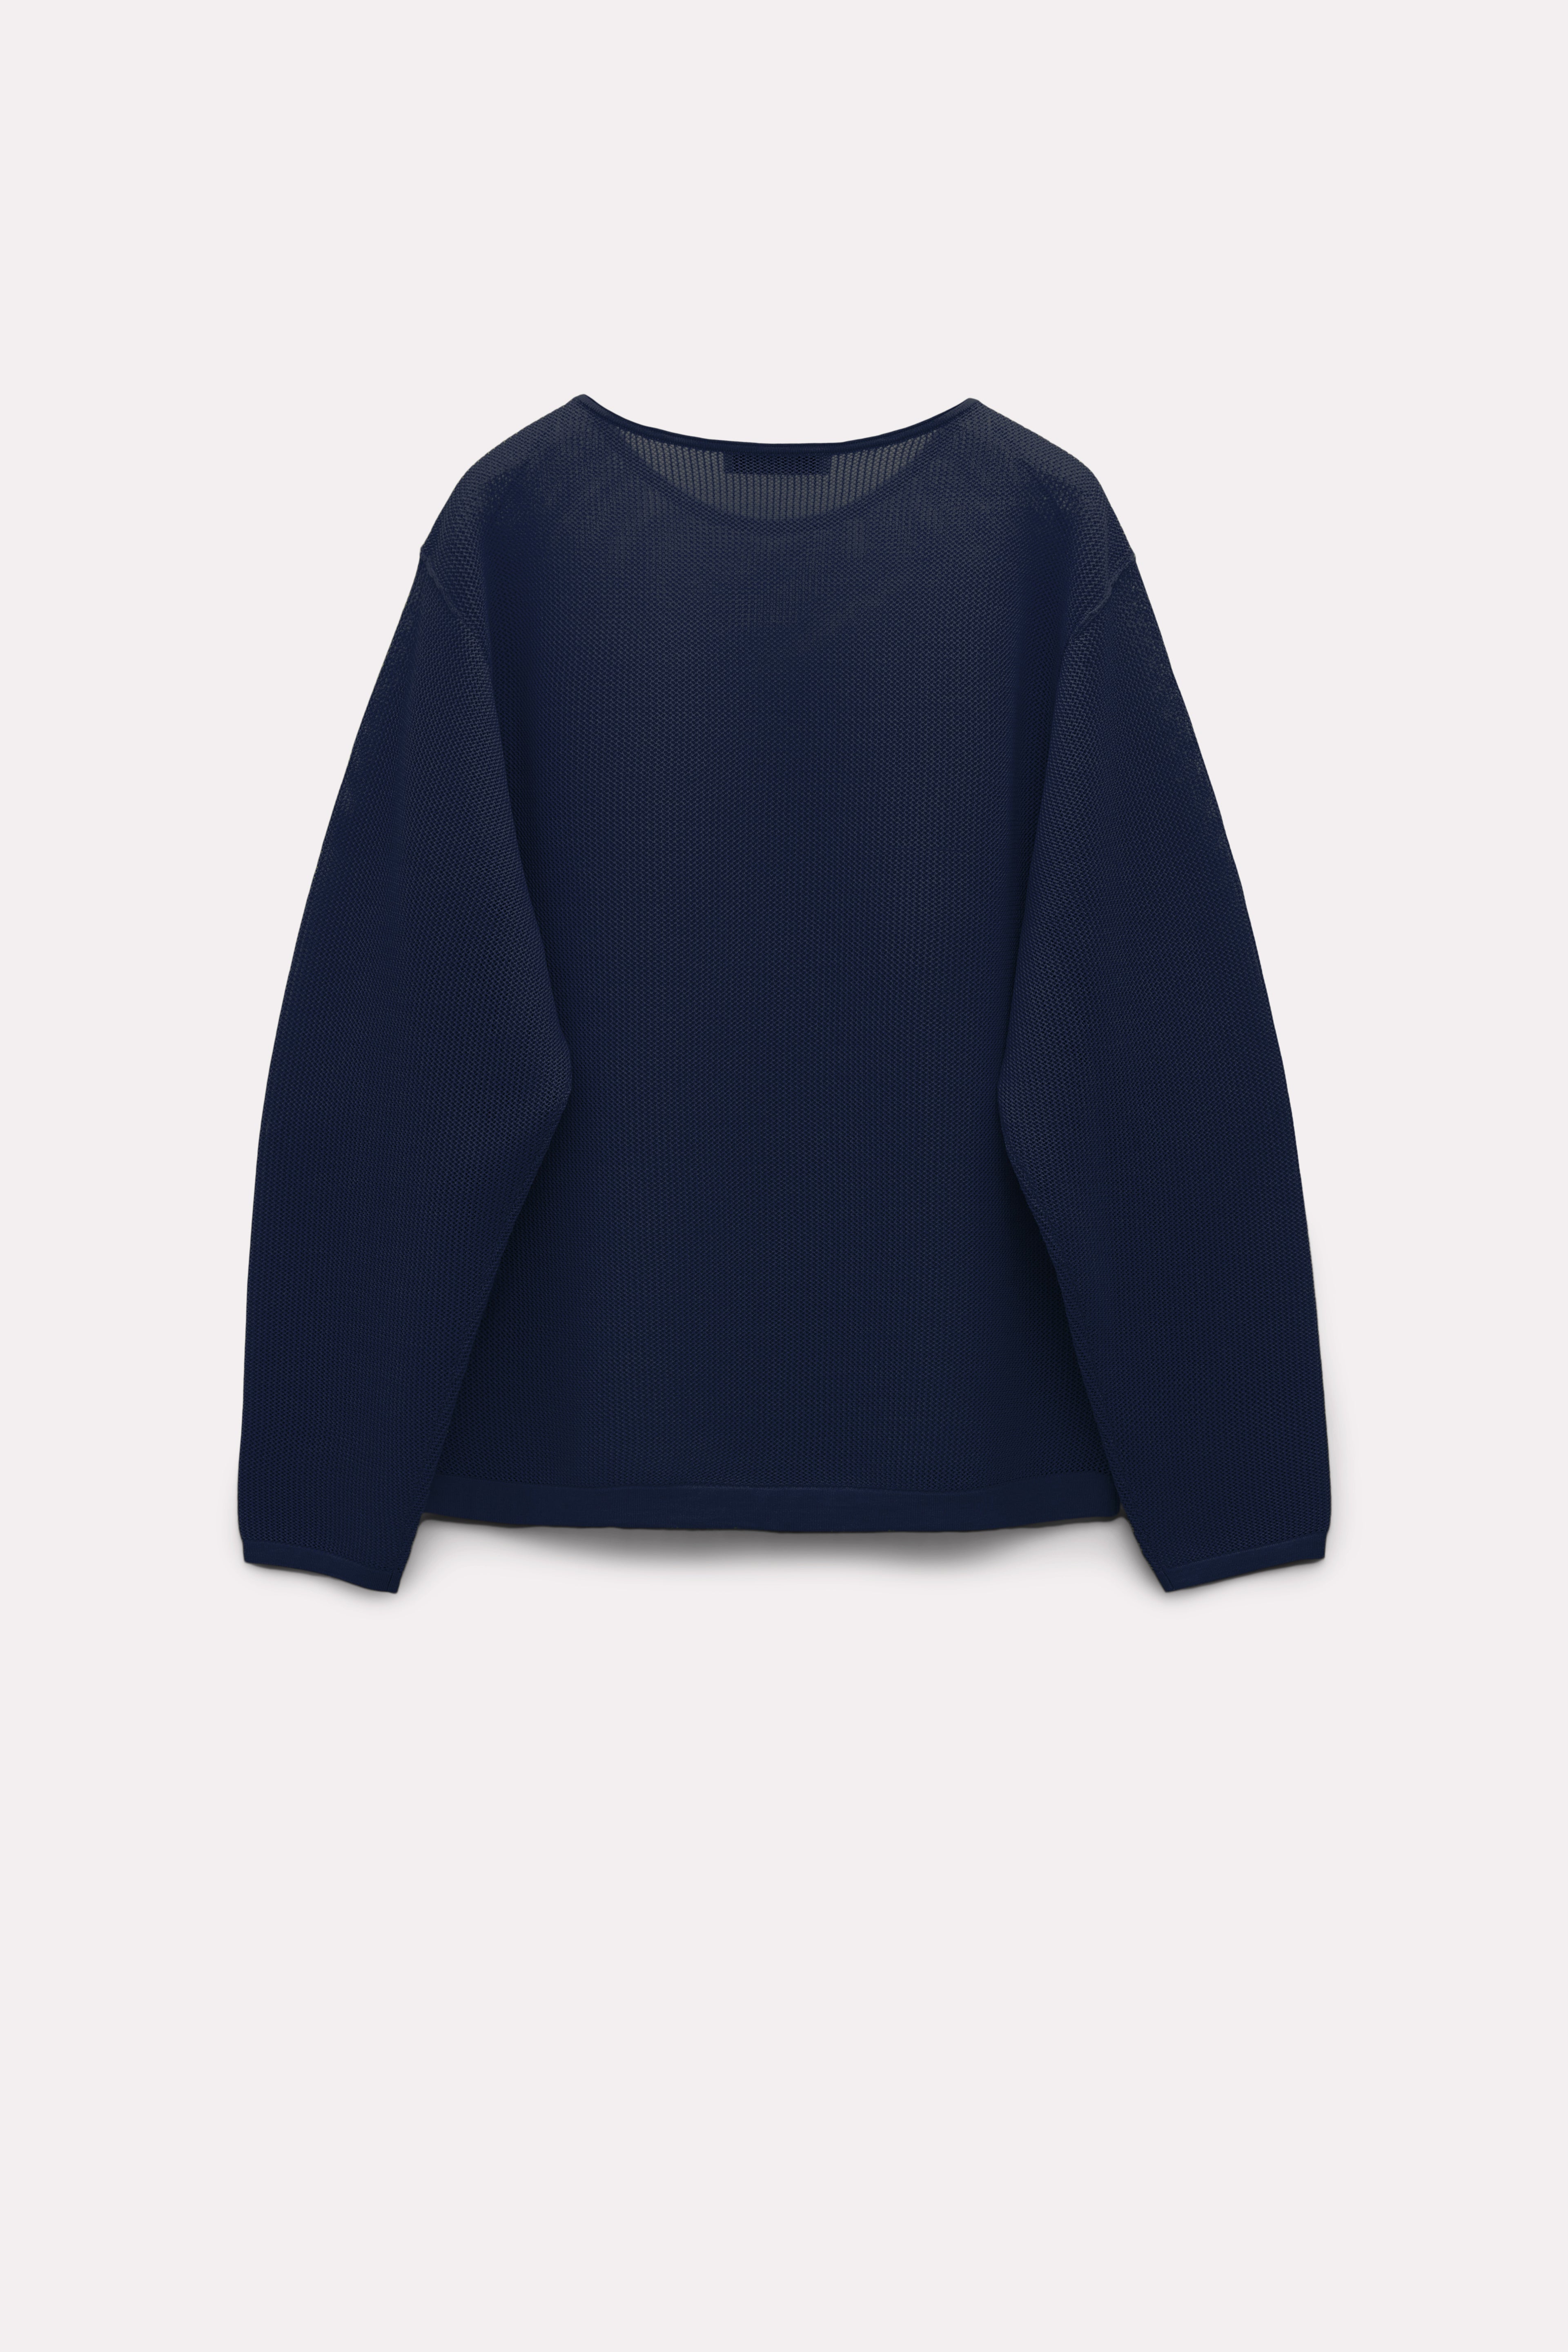 Dorothee-Schumacher-OUTLET-SALE-ESSENTIAL-EASE-pullover-Strick-ARCHIVE-COLLECTION-2_58bfb47d-4579-4137-9a35-61036fed3160.jpg